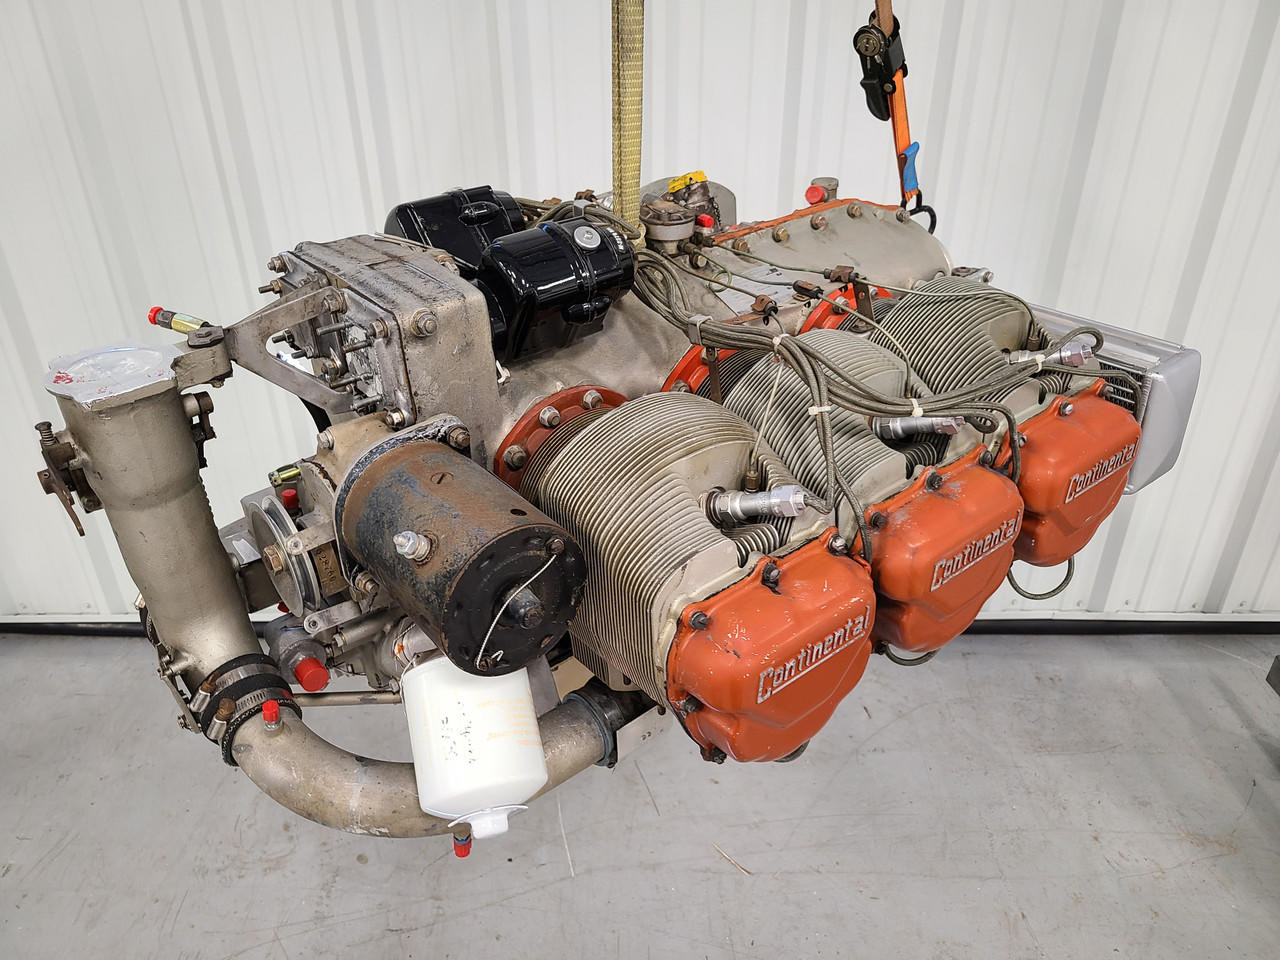 Continental IO-520-L Engine with Accessories (1726 Hours SMOH, No Prop  Strike)